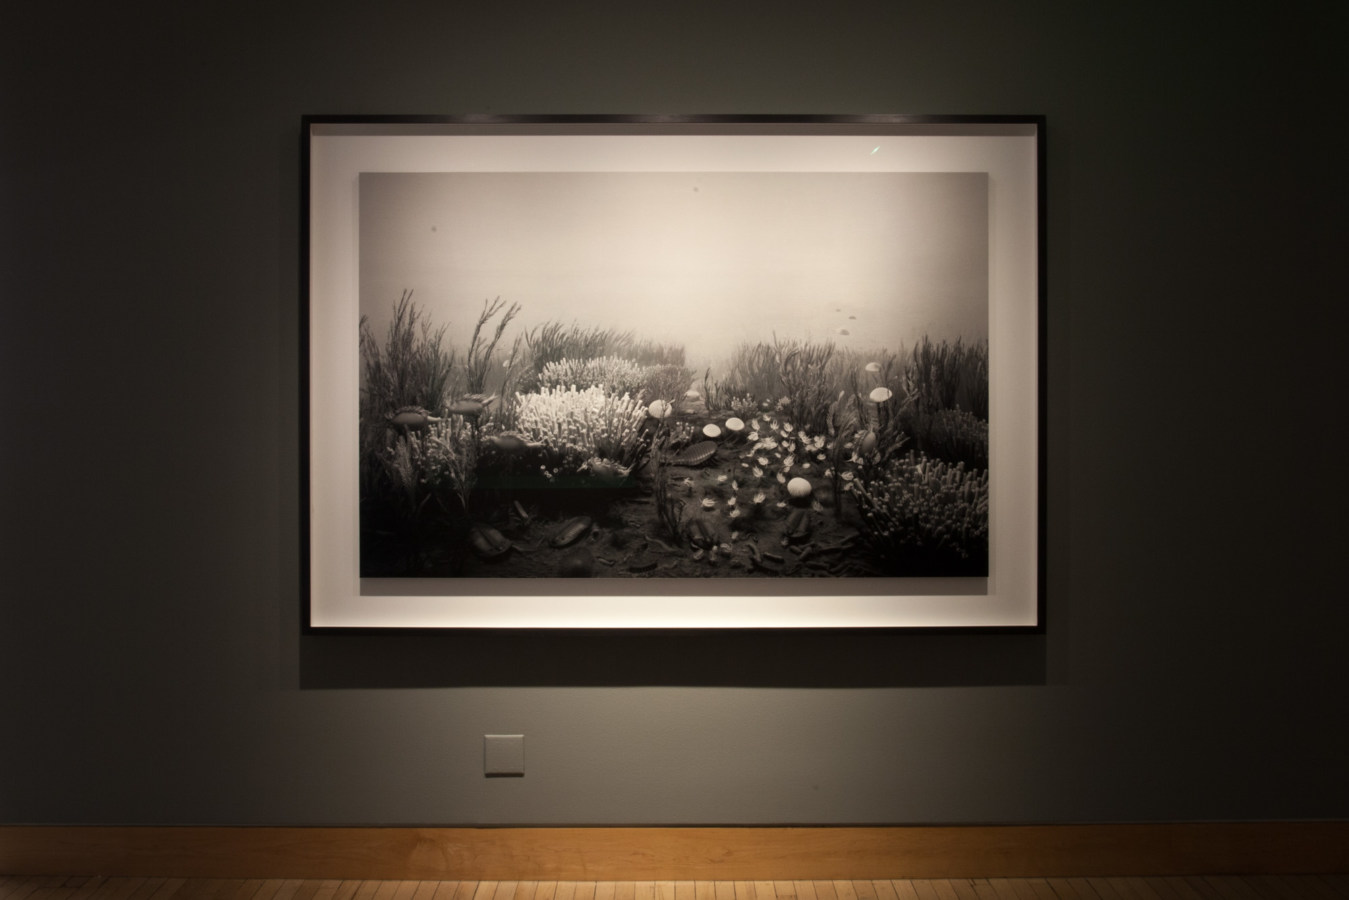 Color image of a large framed black and white photograph of an underwater scene on grey gallery wall